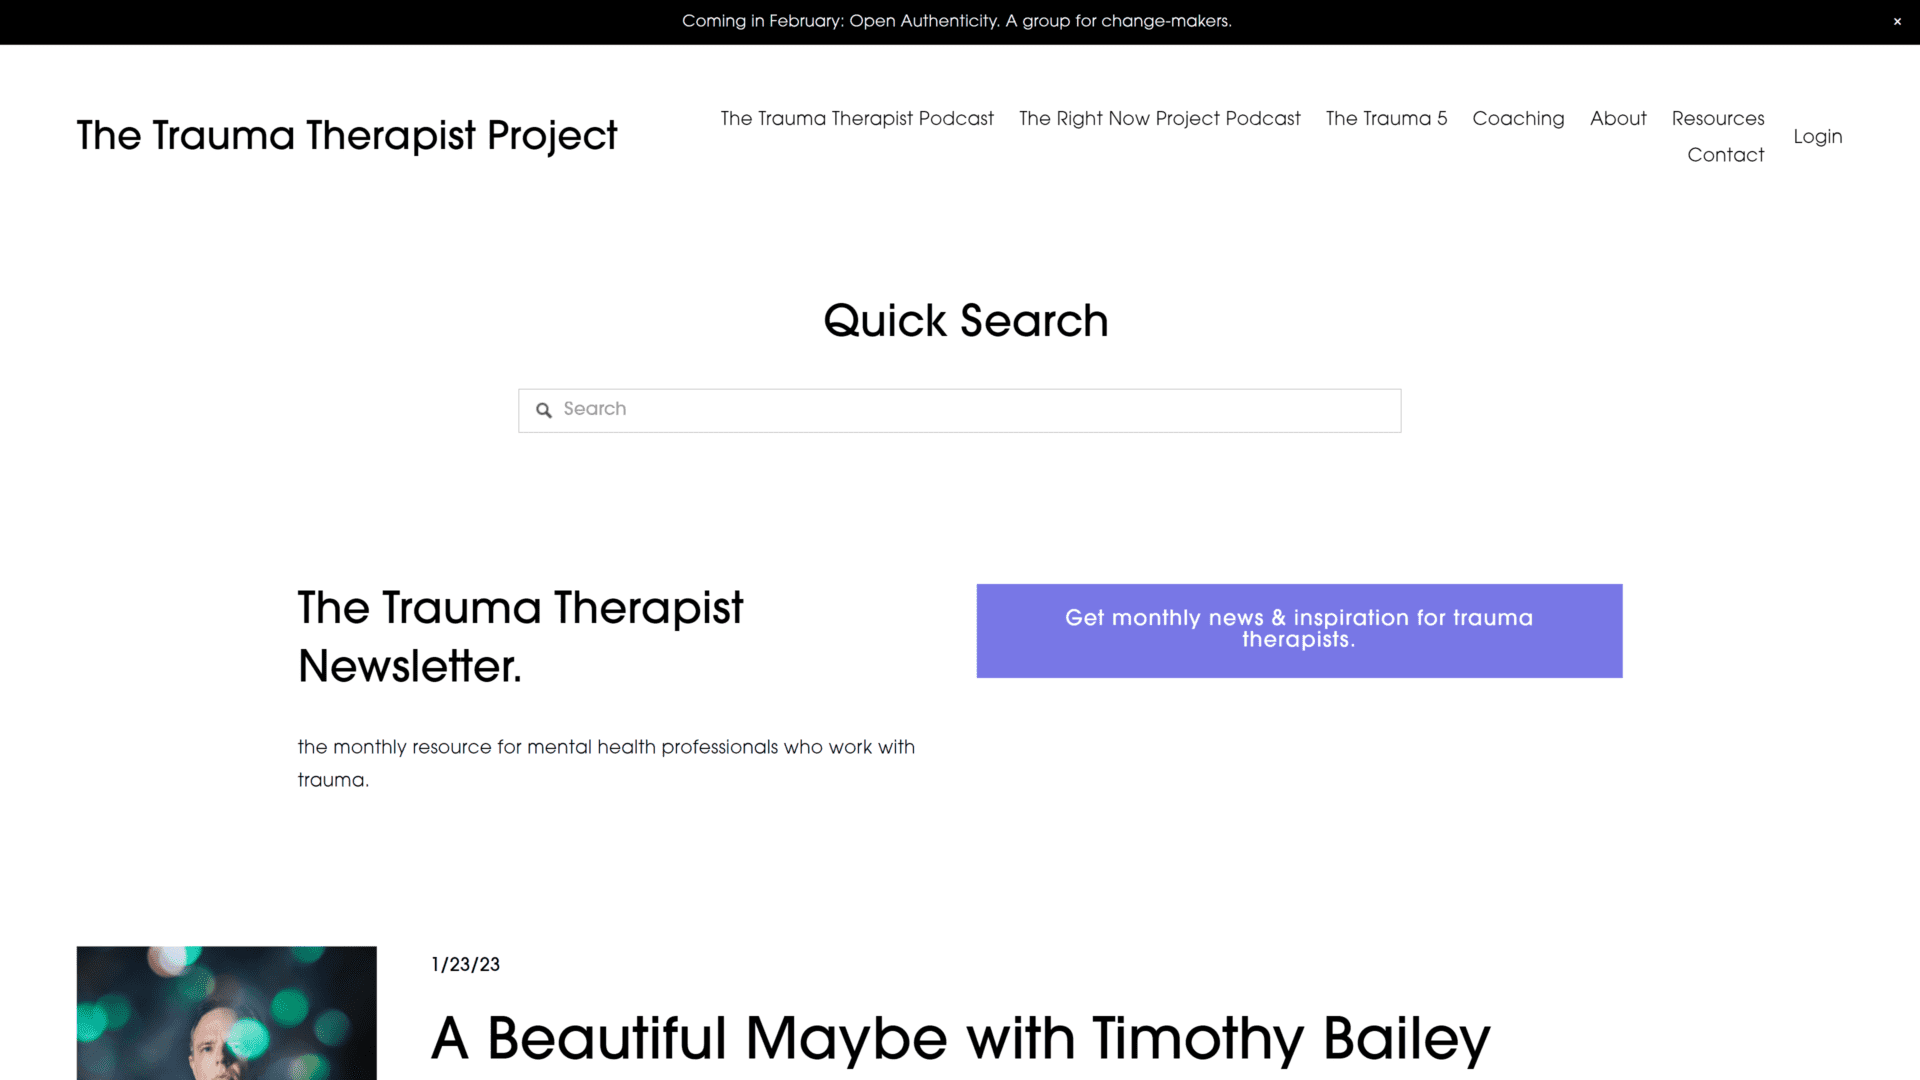 A screenshot of the trauma therapist project homepage